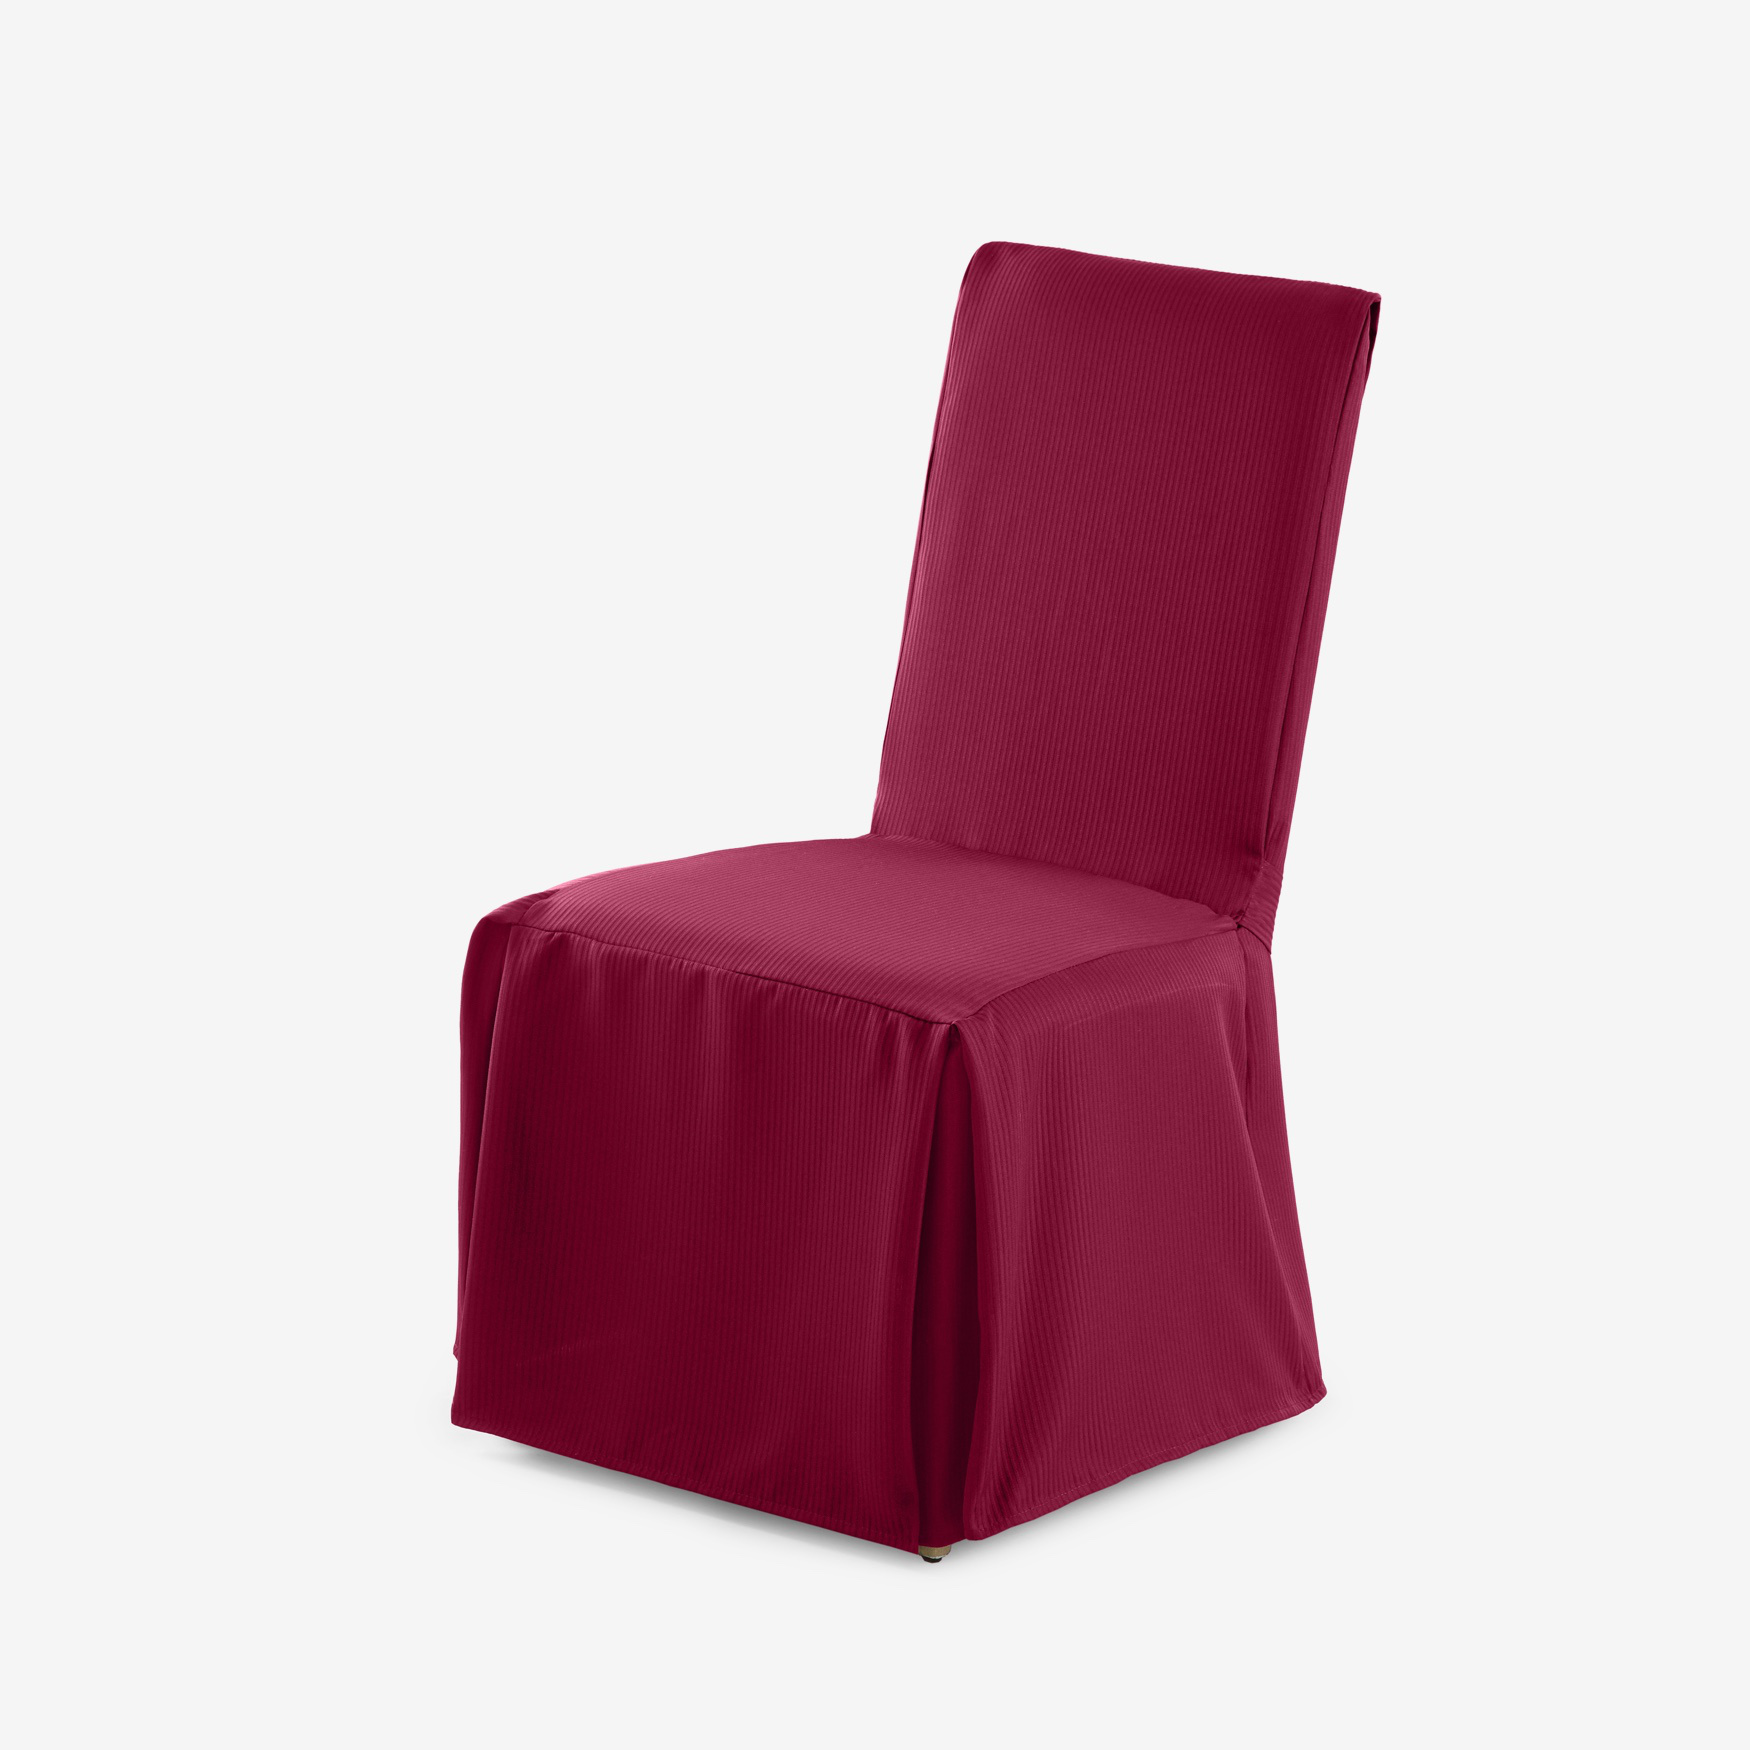 Metro Dining Room Chair Cover, 